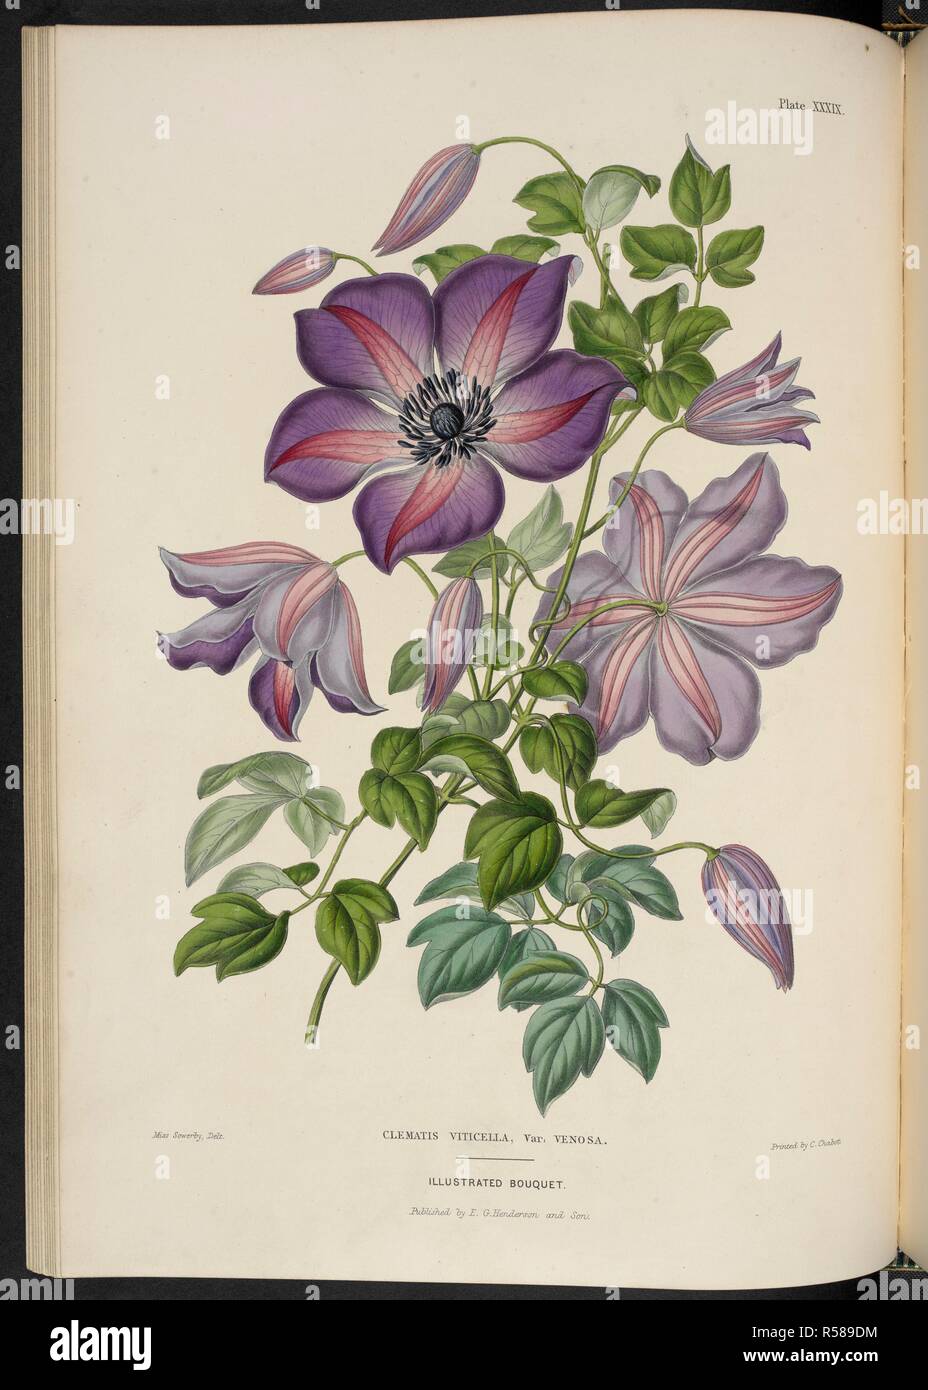 Clematis viticella, var. Venosa. Clematis. Virgin's Bower. The Illustrated Bouquet, consisting of figures, with descriptions of new flowers. London, 1857-64. Source: 1823.c.13 plate 39. Author: Henderson, Edward George. Sowerby, Miss. Stock Photo